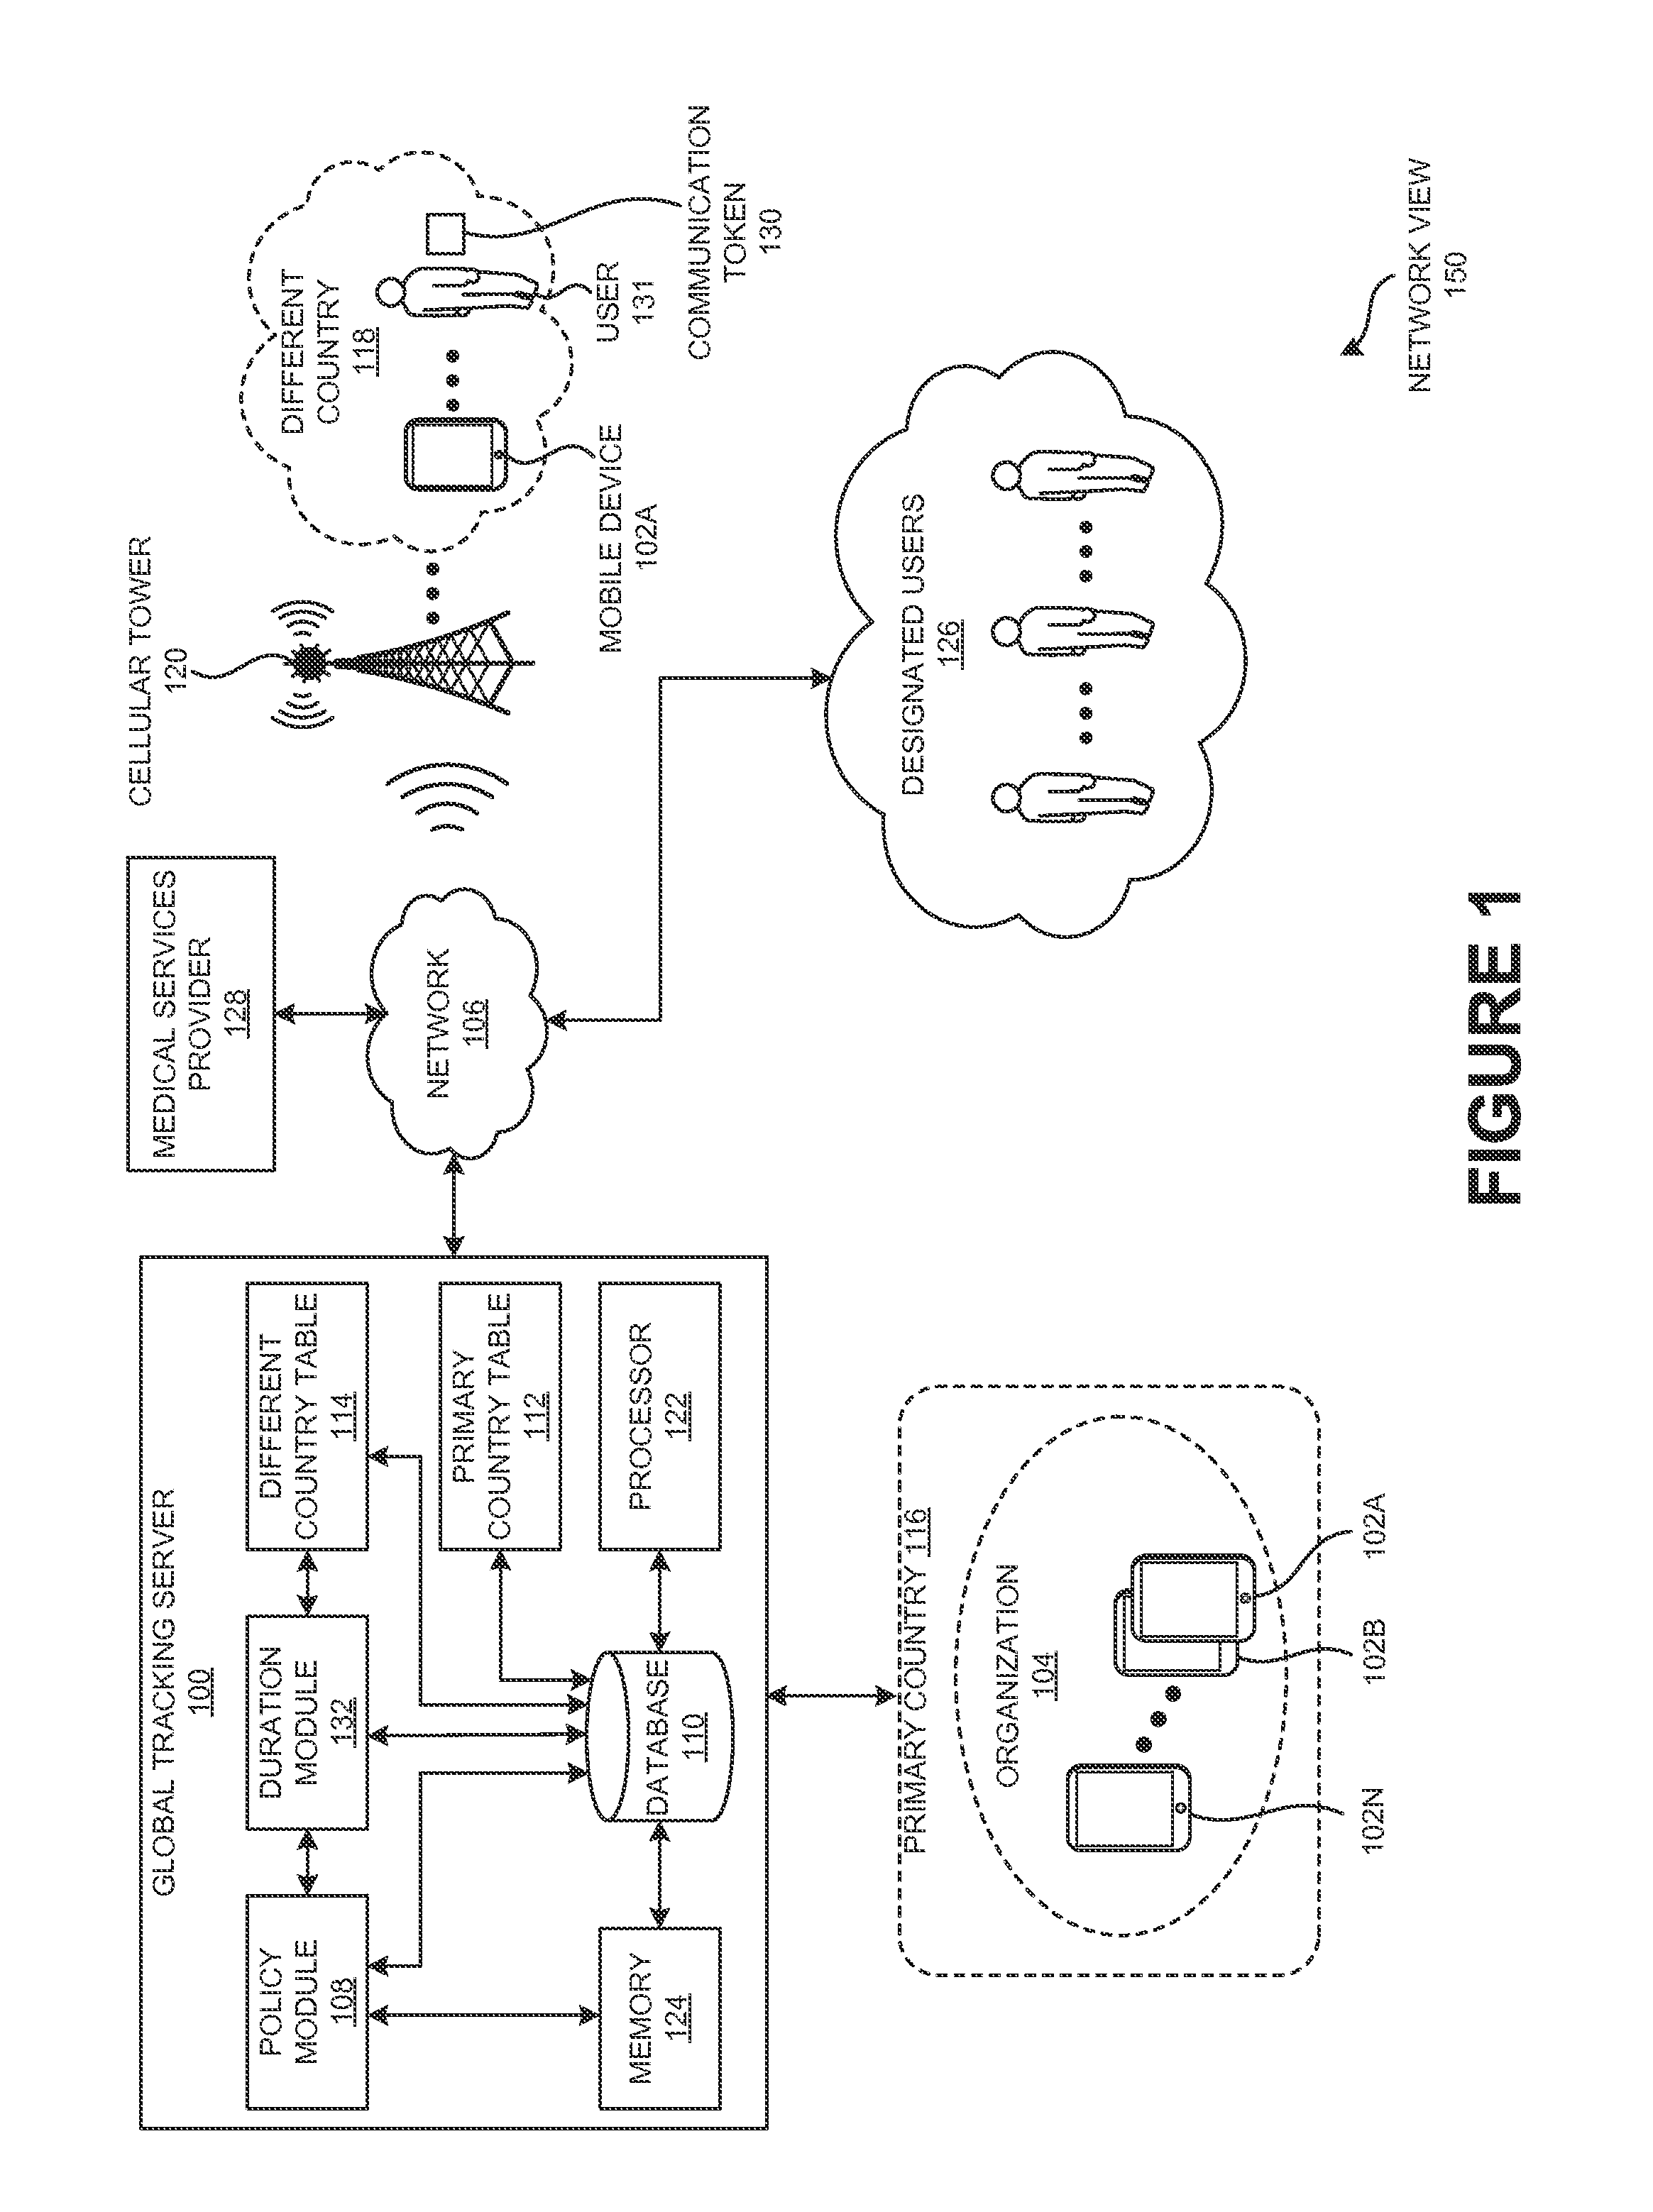 Systems and methods for electronically verifying user location